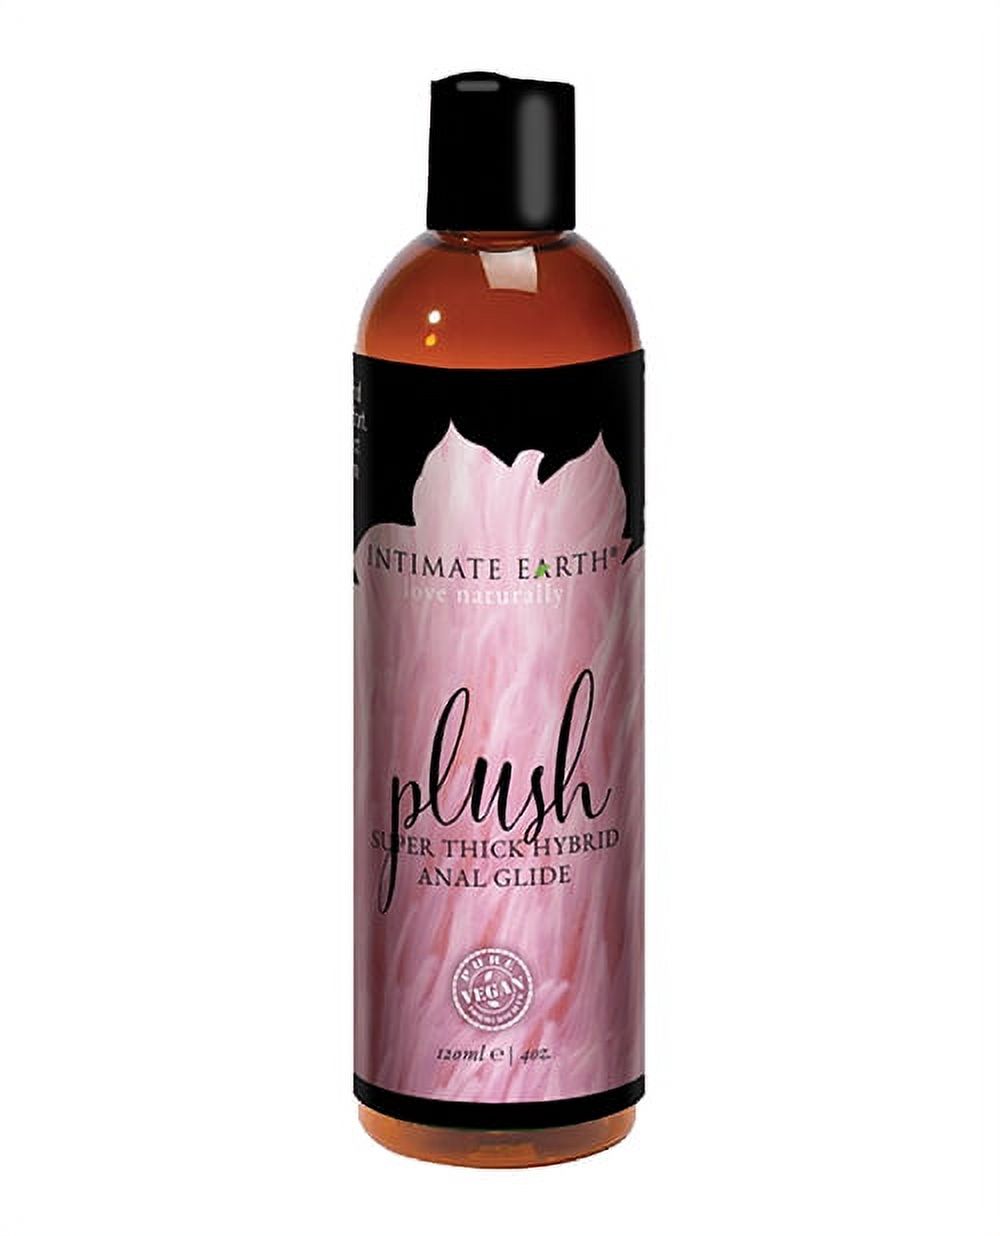 Intimate Earth Plush Super Thick Anal Glide 4oz/120ml - image 1 of 3